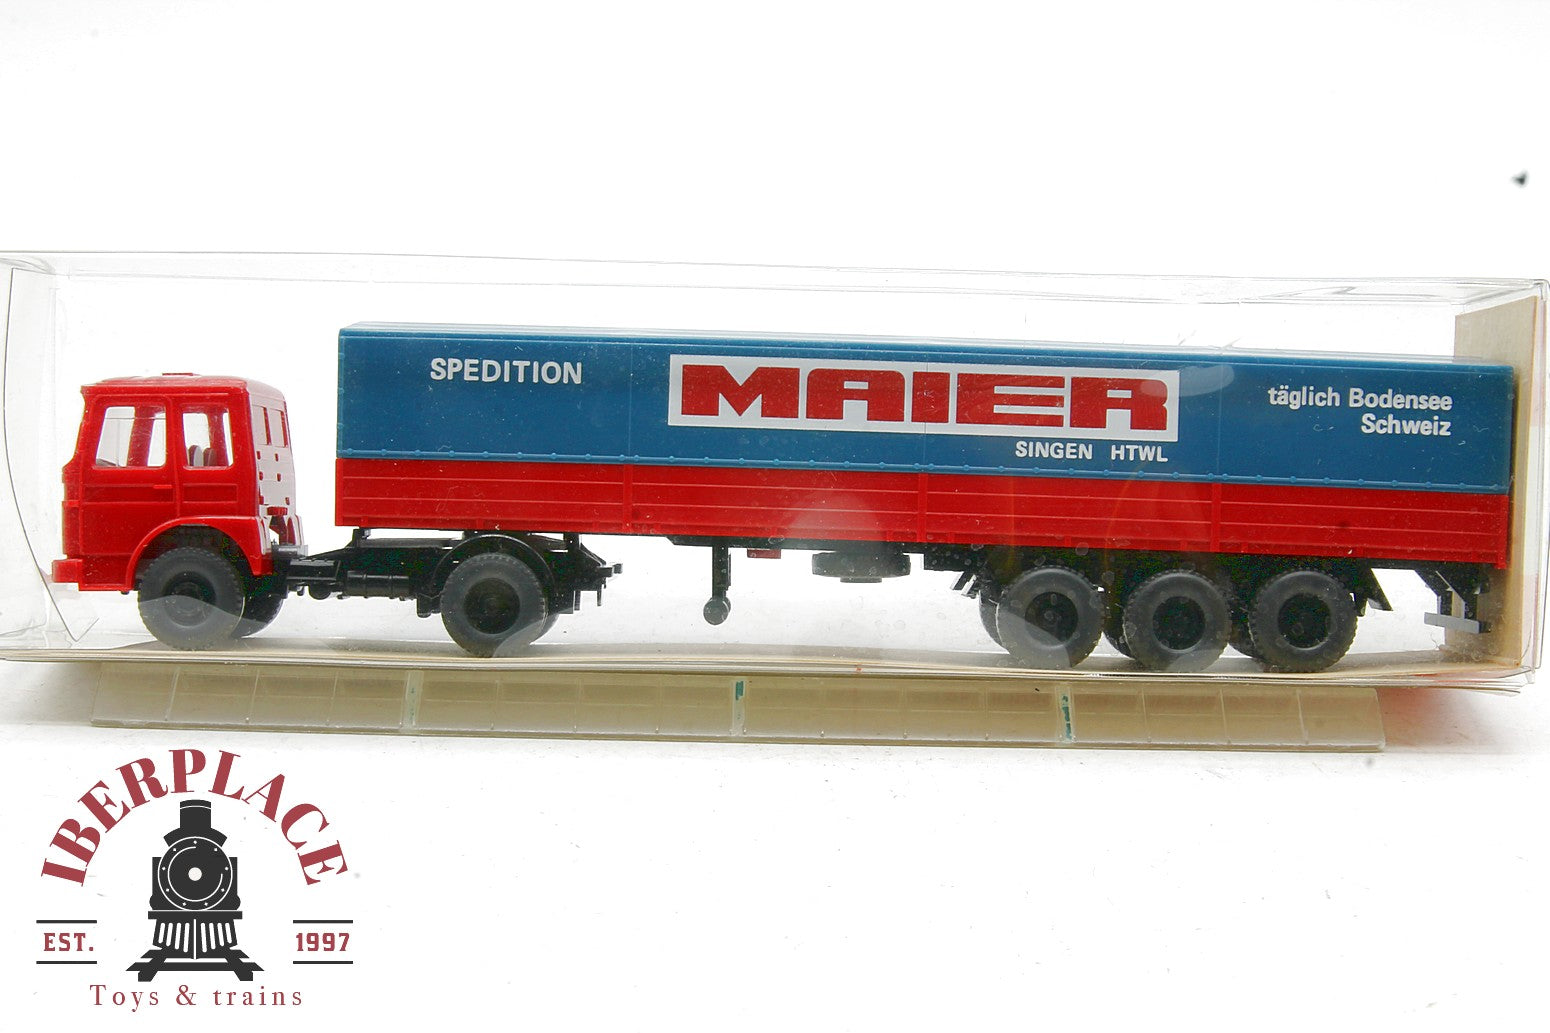 Wiking 517 camión LKW Truck MAN spedition MAIER H0 1:87 automodelismo ho 00